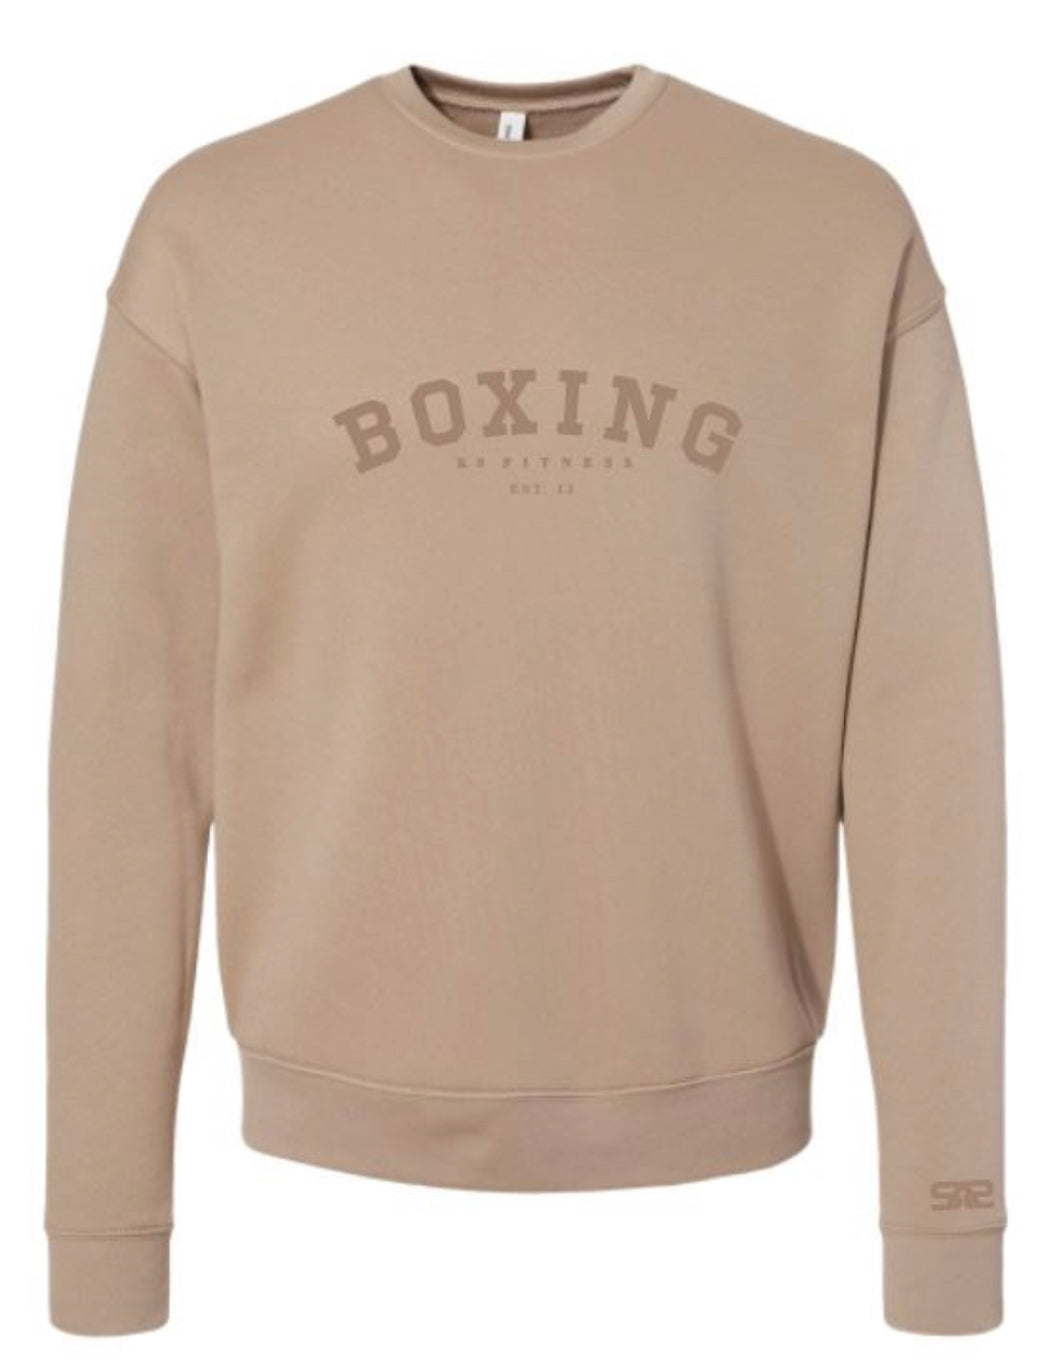 Boxing Sweater